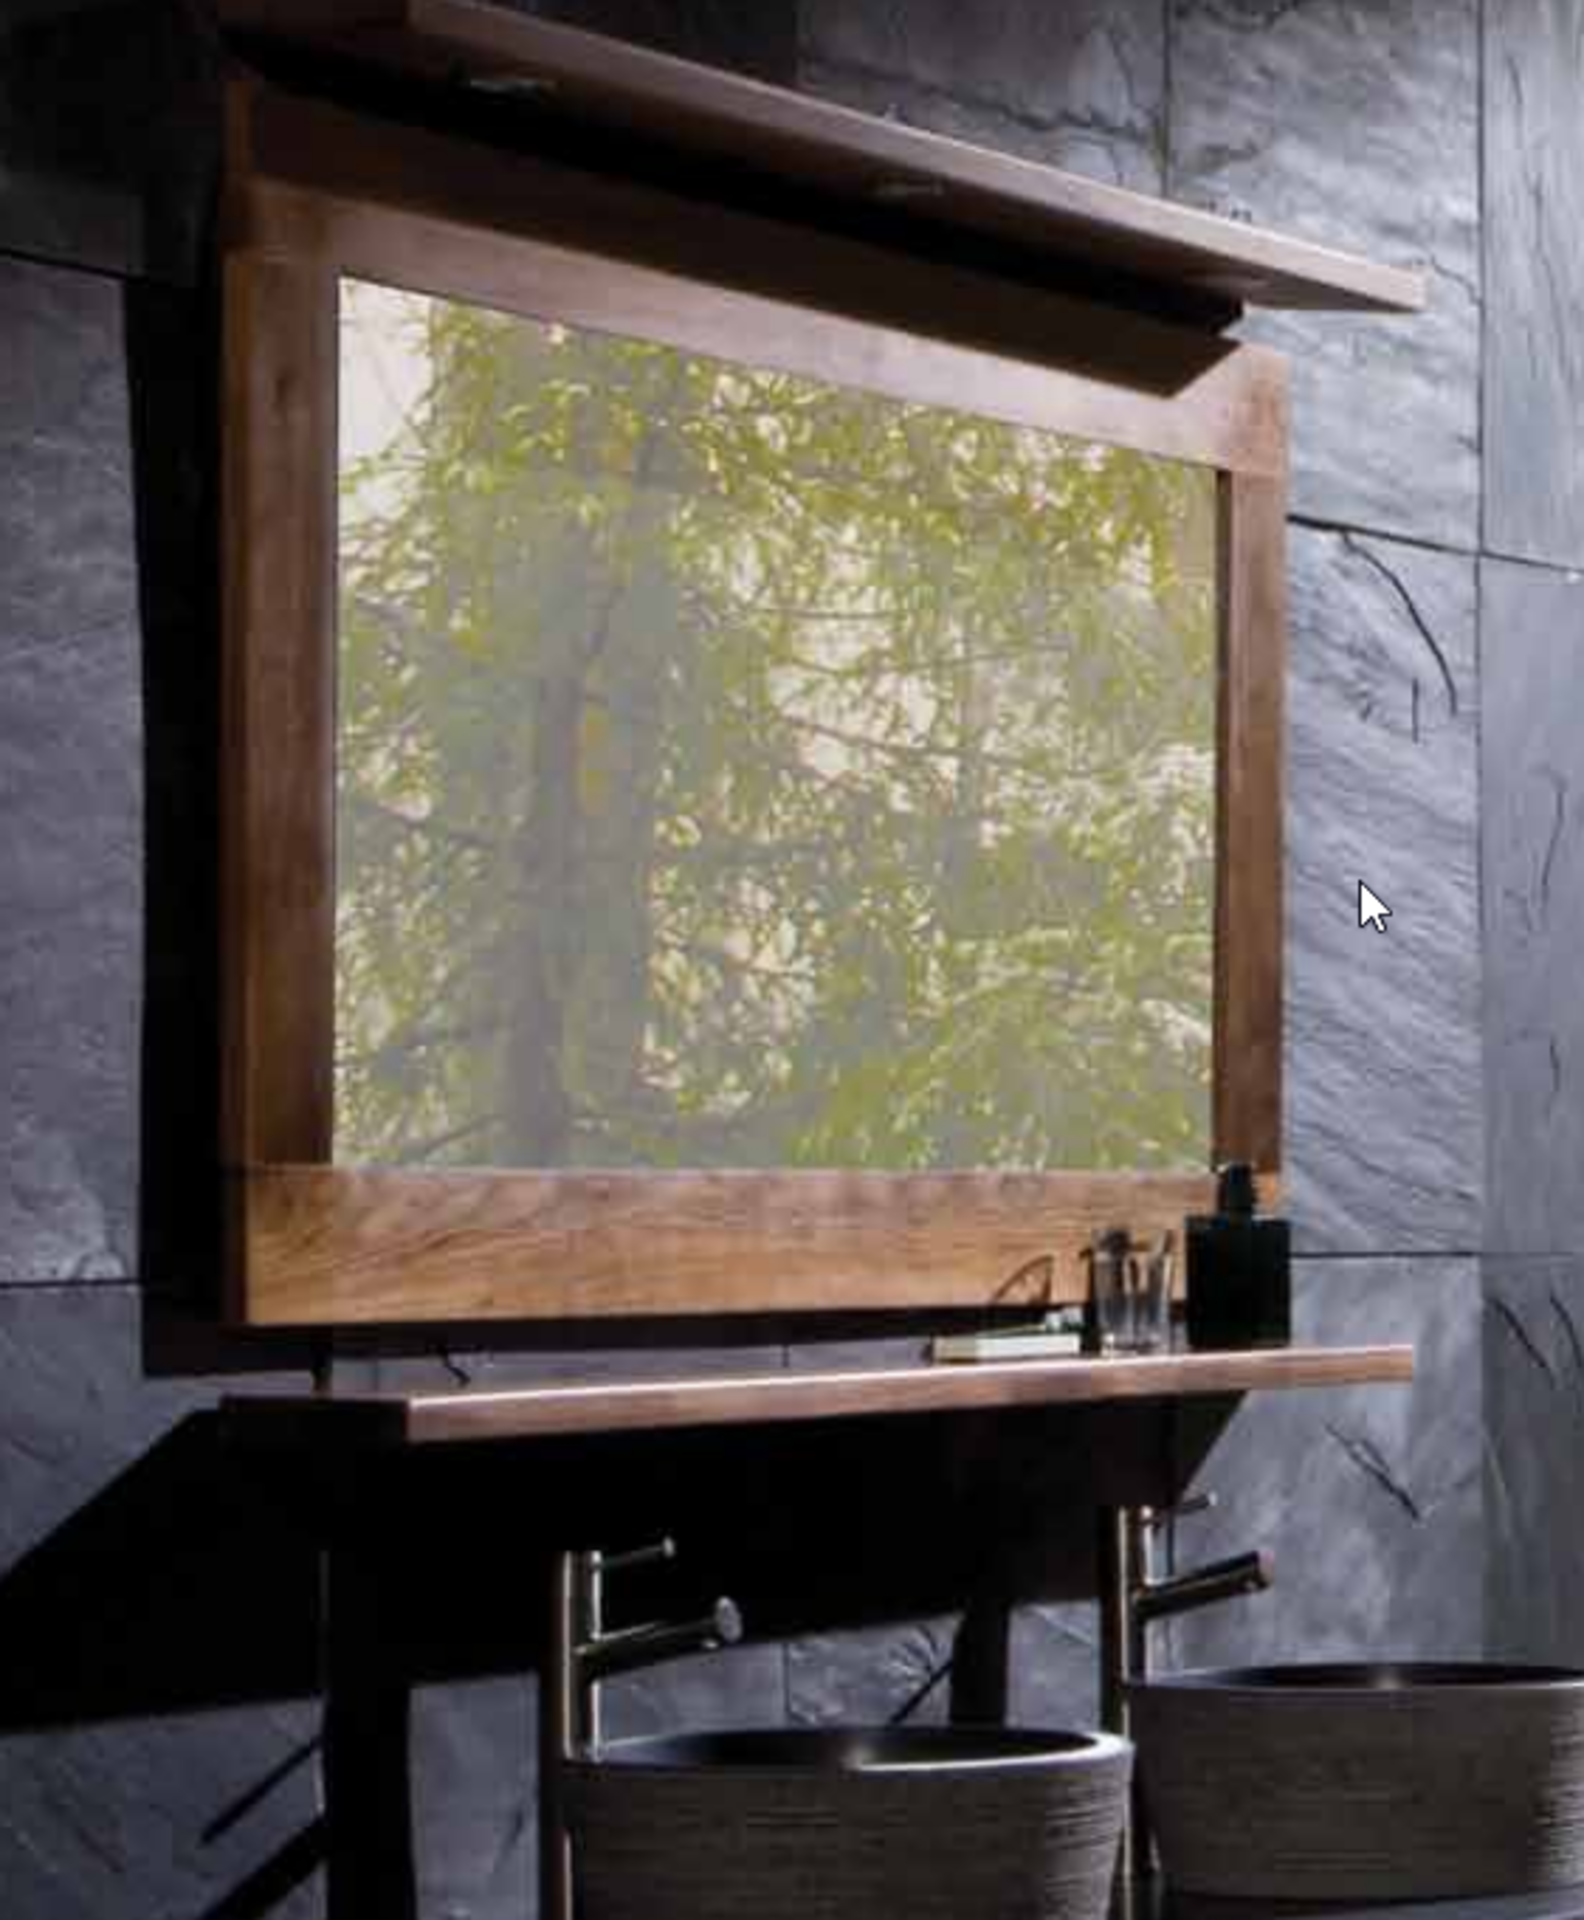 1 x Stonearth Medium Wall Mirror Frame - American Solid Walnut Frame For Mirrors or Pictures - Image 3 of 13